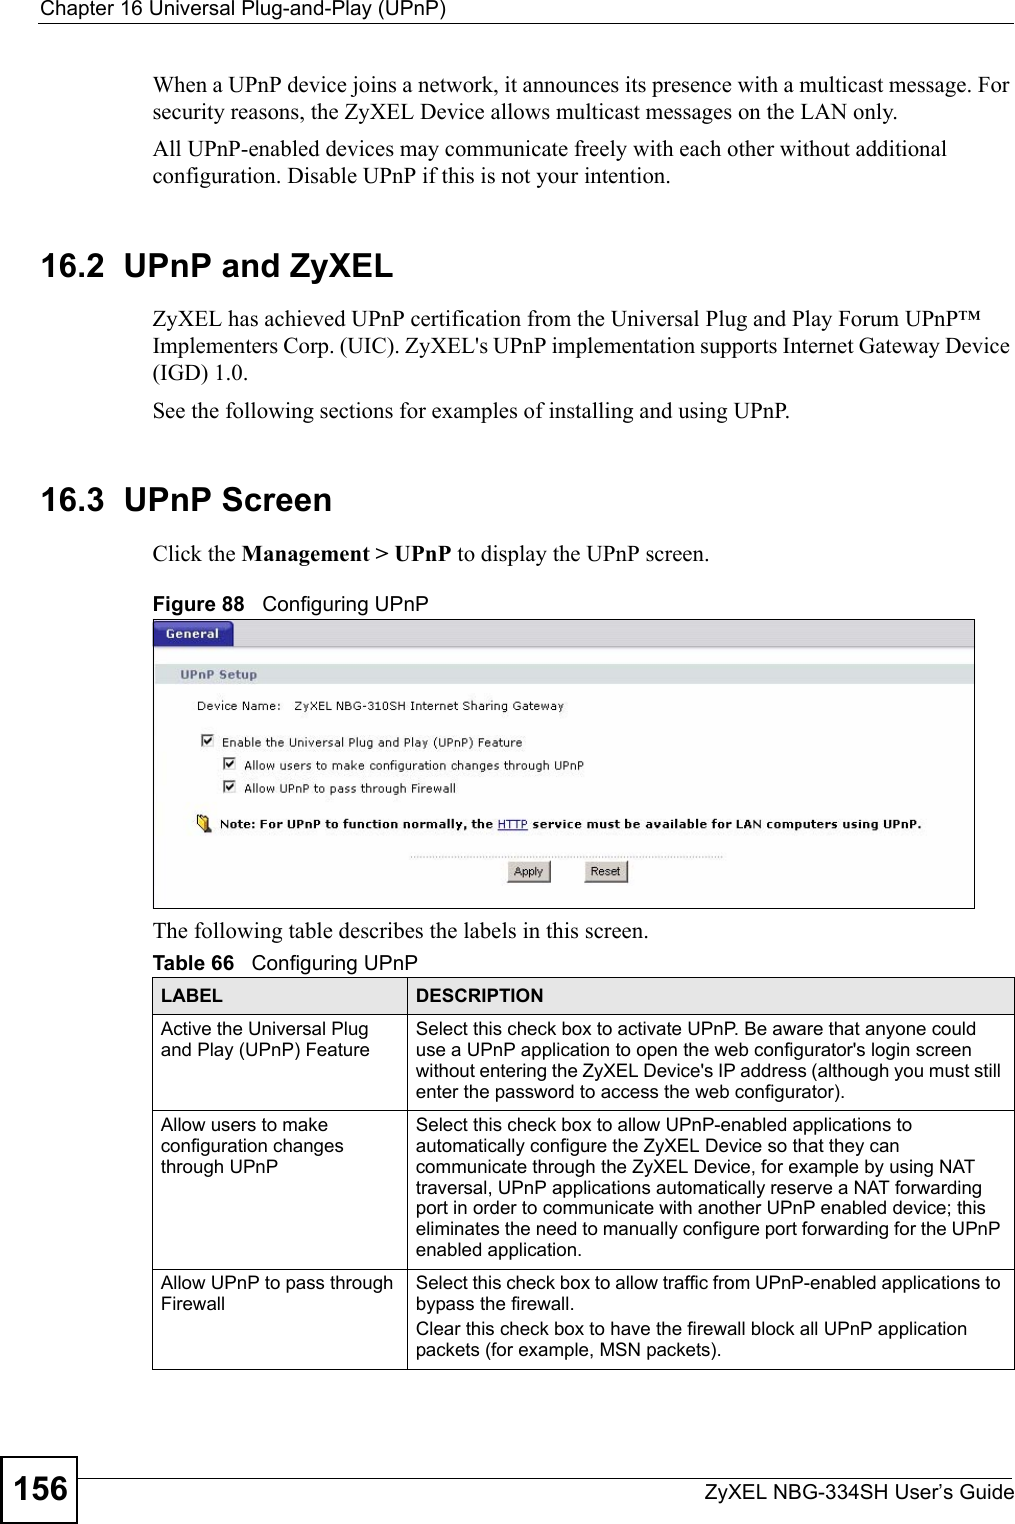 Chapter 16 Universal Plug-and-Play (UPnP)ZyXEL NBG-334SH User’s Guide156When a UPnP device joins a network, it announces its presence with a multicast message. For security reasons, the ZyXEL Device allows multicast messages on the LAN only.All UPnP-enabled devices may communicate freely with each other without additional configuration. Disable UPnP if this is not your intention. 16.2  UPnP and ZyXELZyXEL has achieved UPnP certification from the Universal Plug and Play Forum UPnP™ Implementers Corp. (UIC). ZyXEL&apos;s UPnP implementation supports Internet Gateway Device (IGD) 1.0. See the following sections for examples of installing and using UPnP.16.3  UPnP ScreenClick the Management &gt; UPnP to display the UPnP screen.Figure 88   Configuring UPnPThe following table describes the labels in this screen. Table 66   Configuring UPnPLABEL DESCRIPTIONActive the Universal Plug and Play (UPnP) FeatureSelect this check box to activate UPnP. Be aware that anyone could use a UPnP application to open the web configurator&apos;s login screen without entering the ZyXEL Device&apos;s IP address (although you must still enter the password to access the web configurator).Allow users to make configuration changes through UPnPSelect this check box to allow UPnP-enabled applications to automatically configure the ZyXEL Device so that they can communicate through the ZyXEL Device, for example by using NAT traversal, UPnP applications automatically reserve a NAT forwarding port in order to communicate with another UPnP enabled device; this eliminates the need to manually configure port forwarding for the UPnP enabled application. Allow UPnP to pass through FirewallSelect this check box to allow traffic from UPnP-enabled applications to bypass the firewall. Clear this check box to have the firewall block all UPnP application packets (for example, MSN packets).